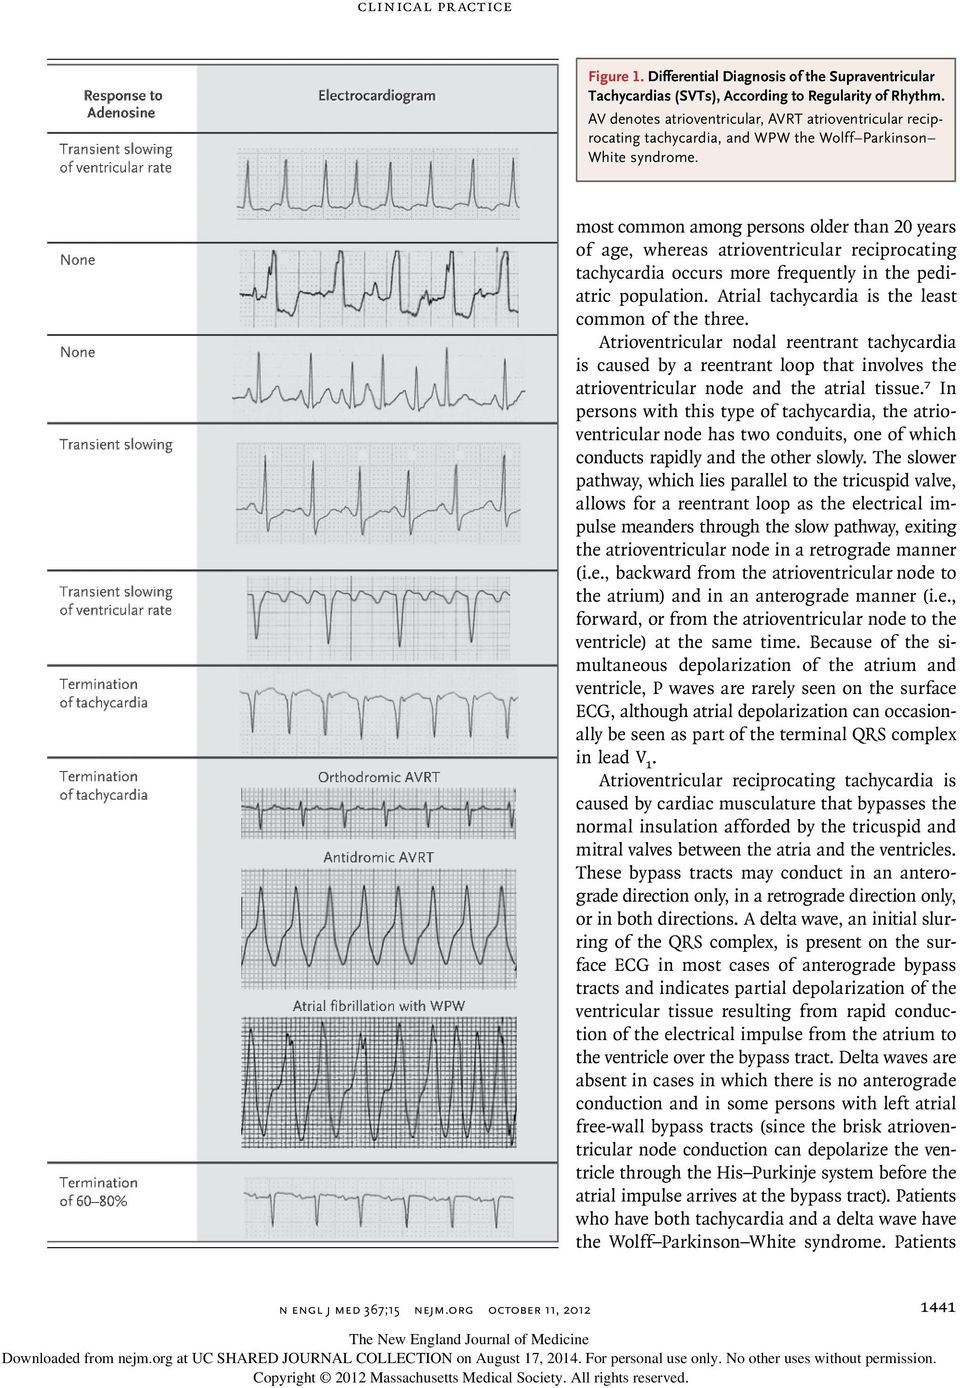 most common among persons older than 20 years of age, whereas atrioventricular reciprocating tachycardia occurs more frequently in the pediatric population.